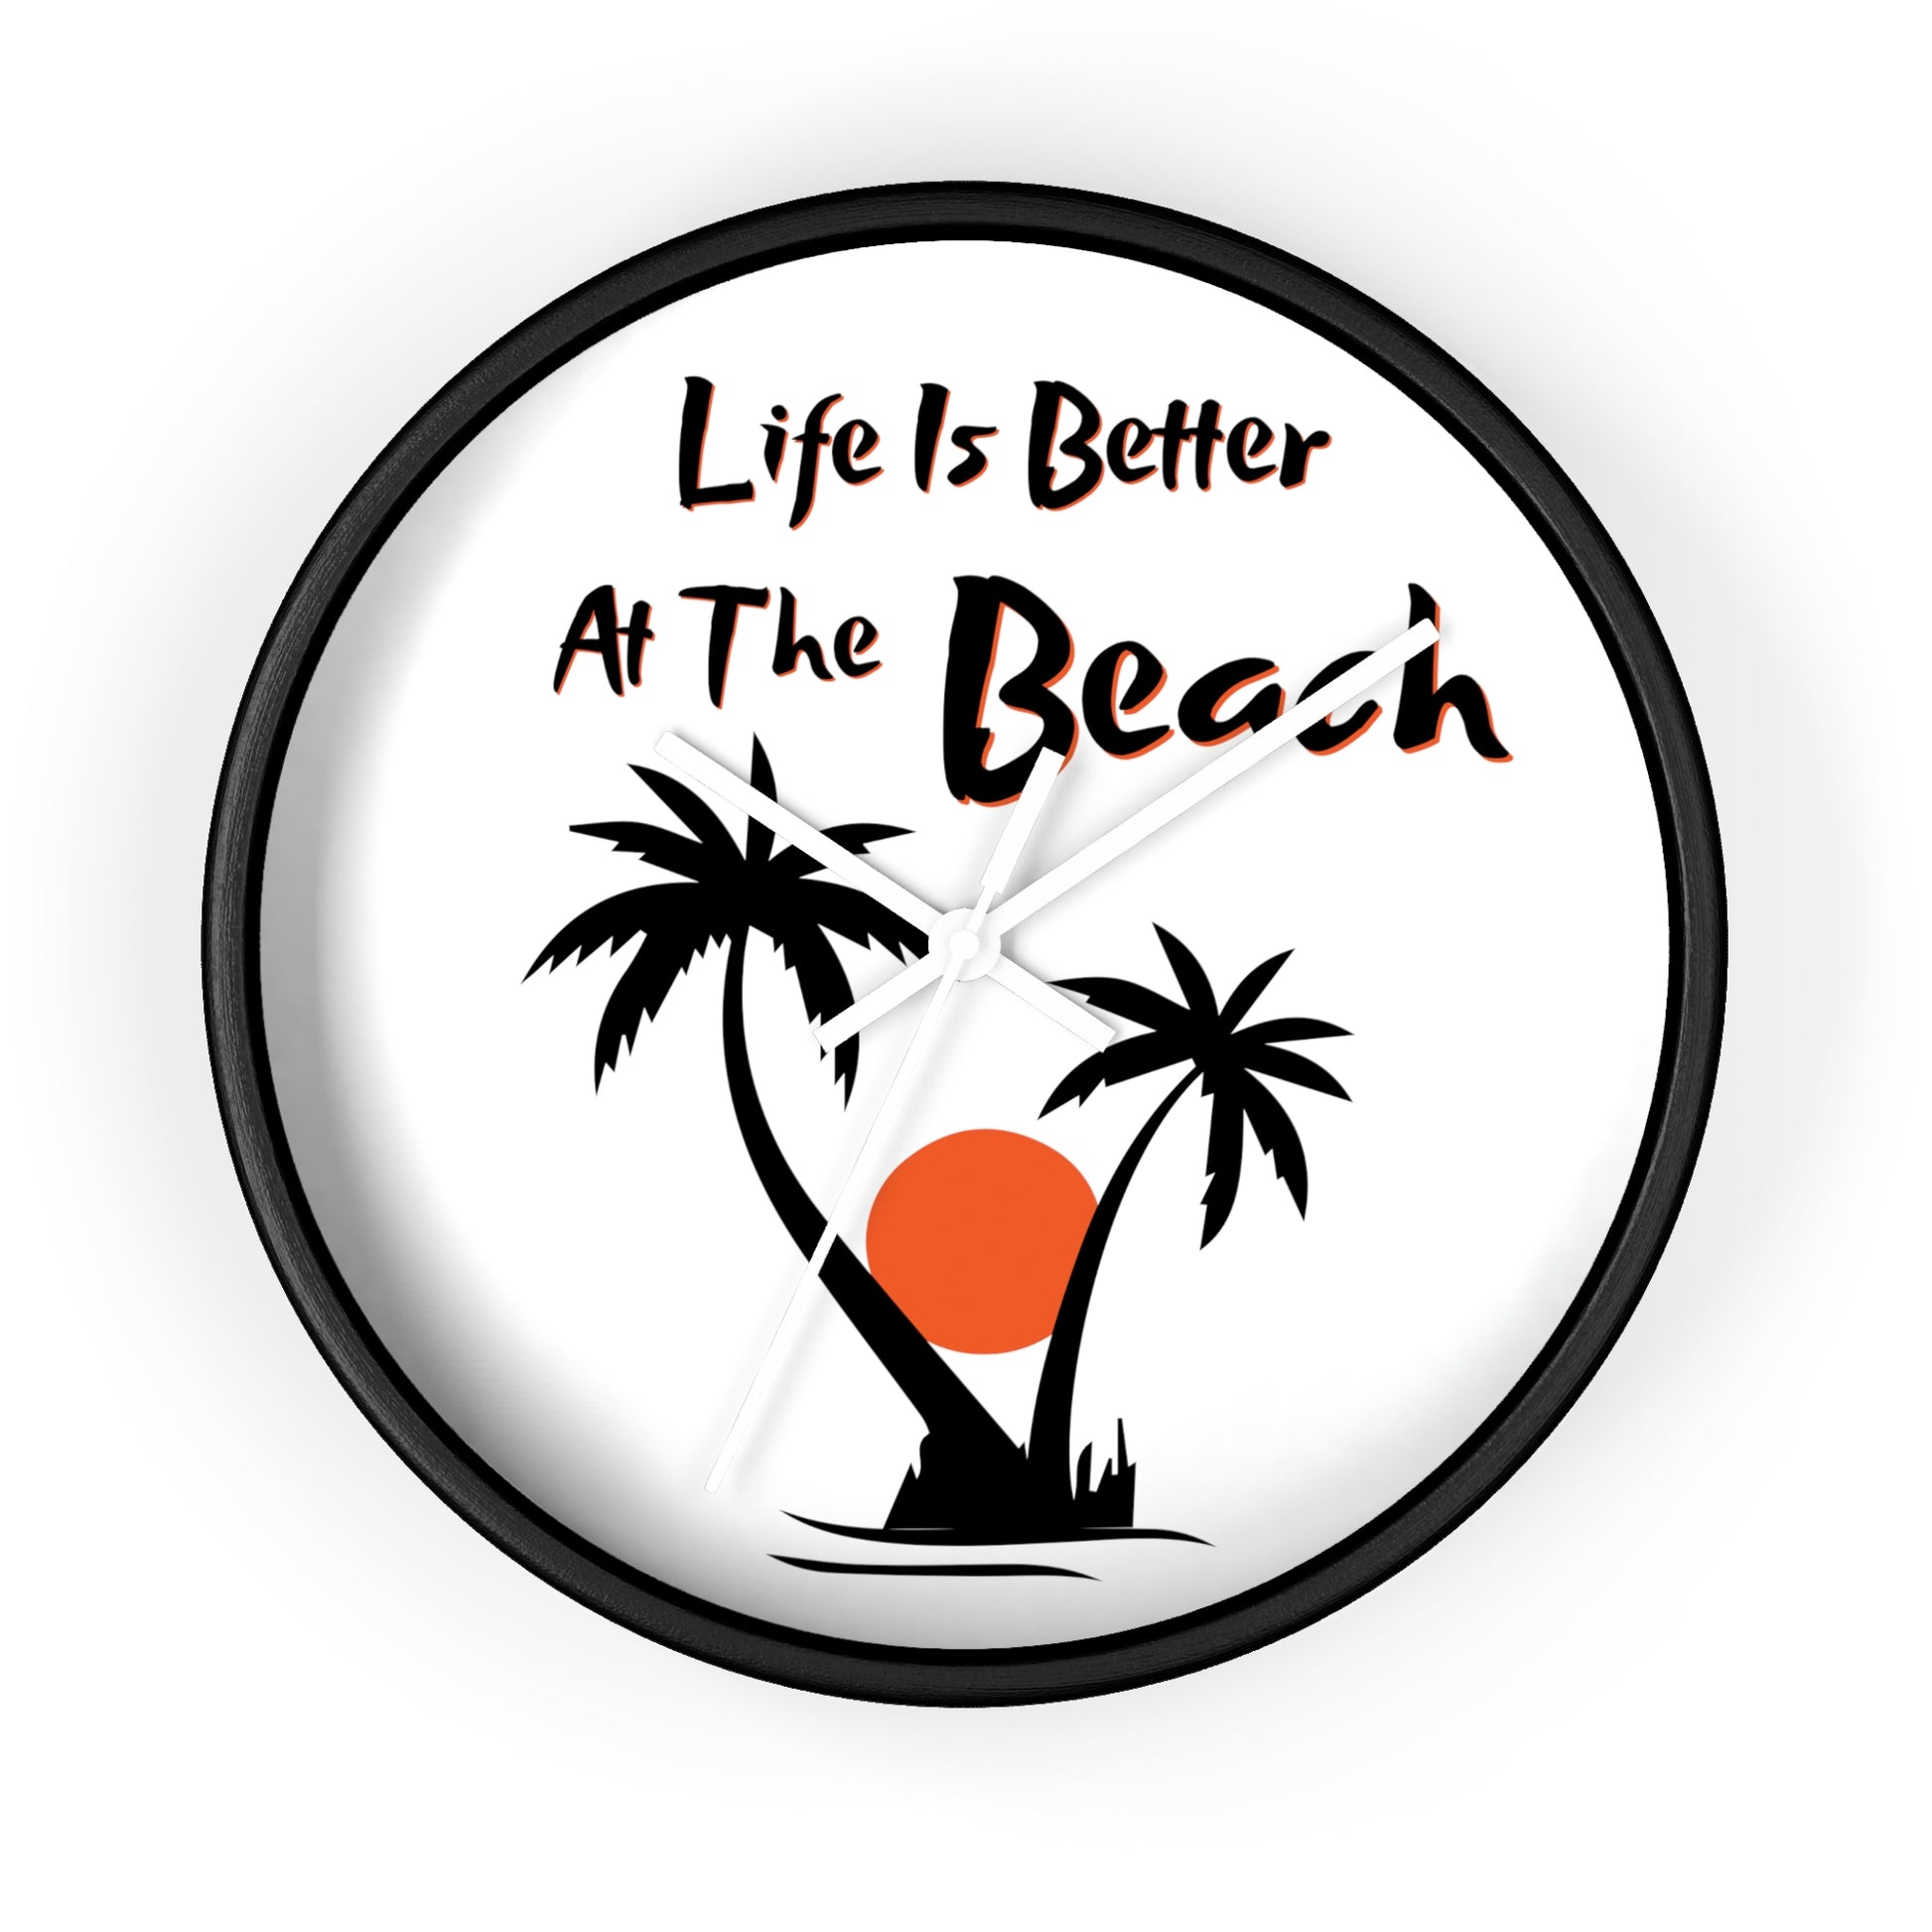 “Life Is Better At The Beach” Wall Clock - Weave Got Gifts - Unique Gifts You Won’t Find Anywhere Else!